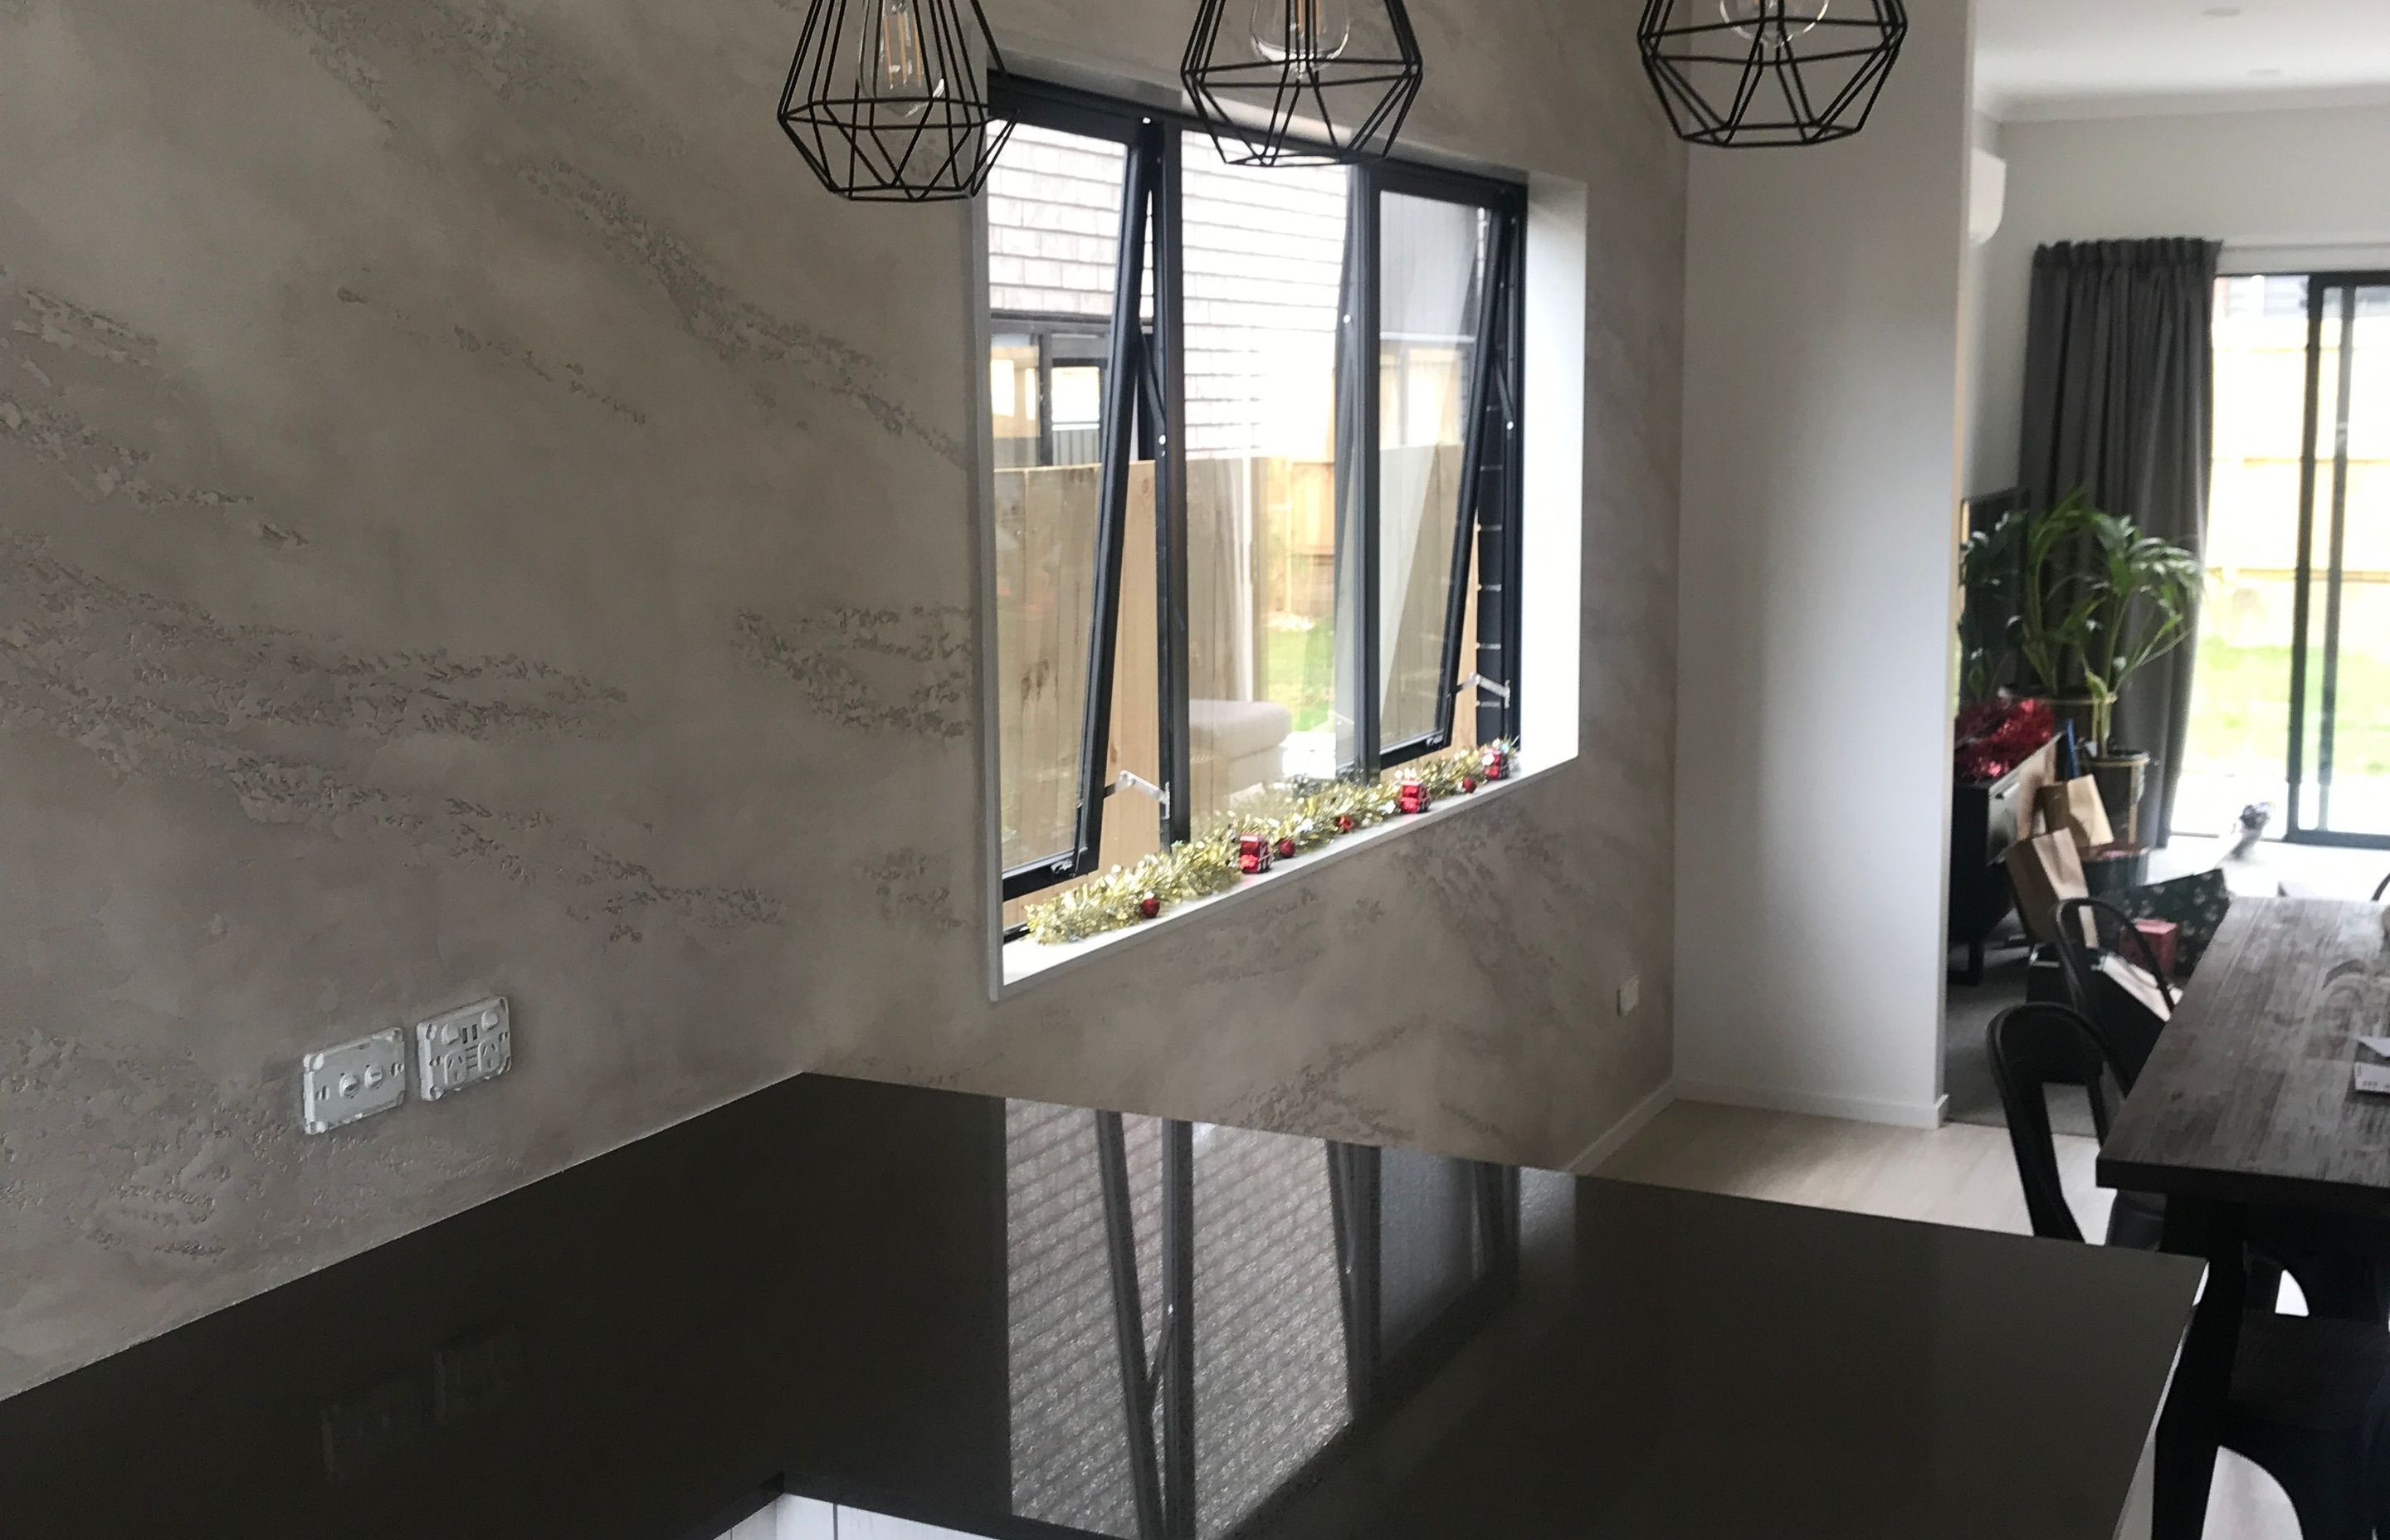 Splashback and continuous wall, Split stone